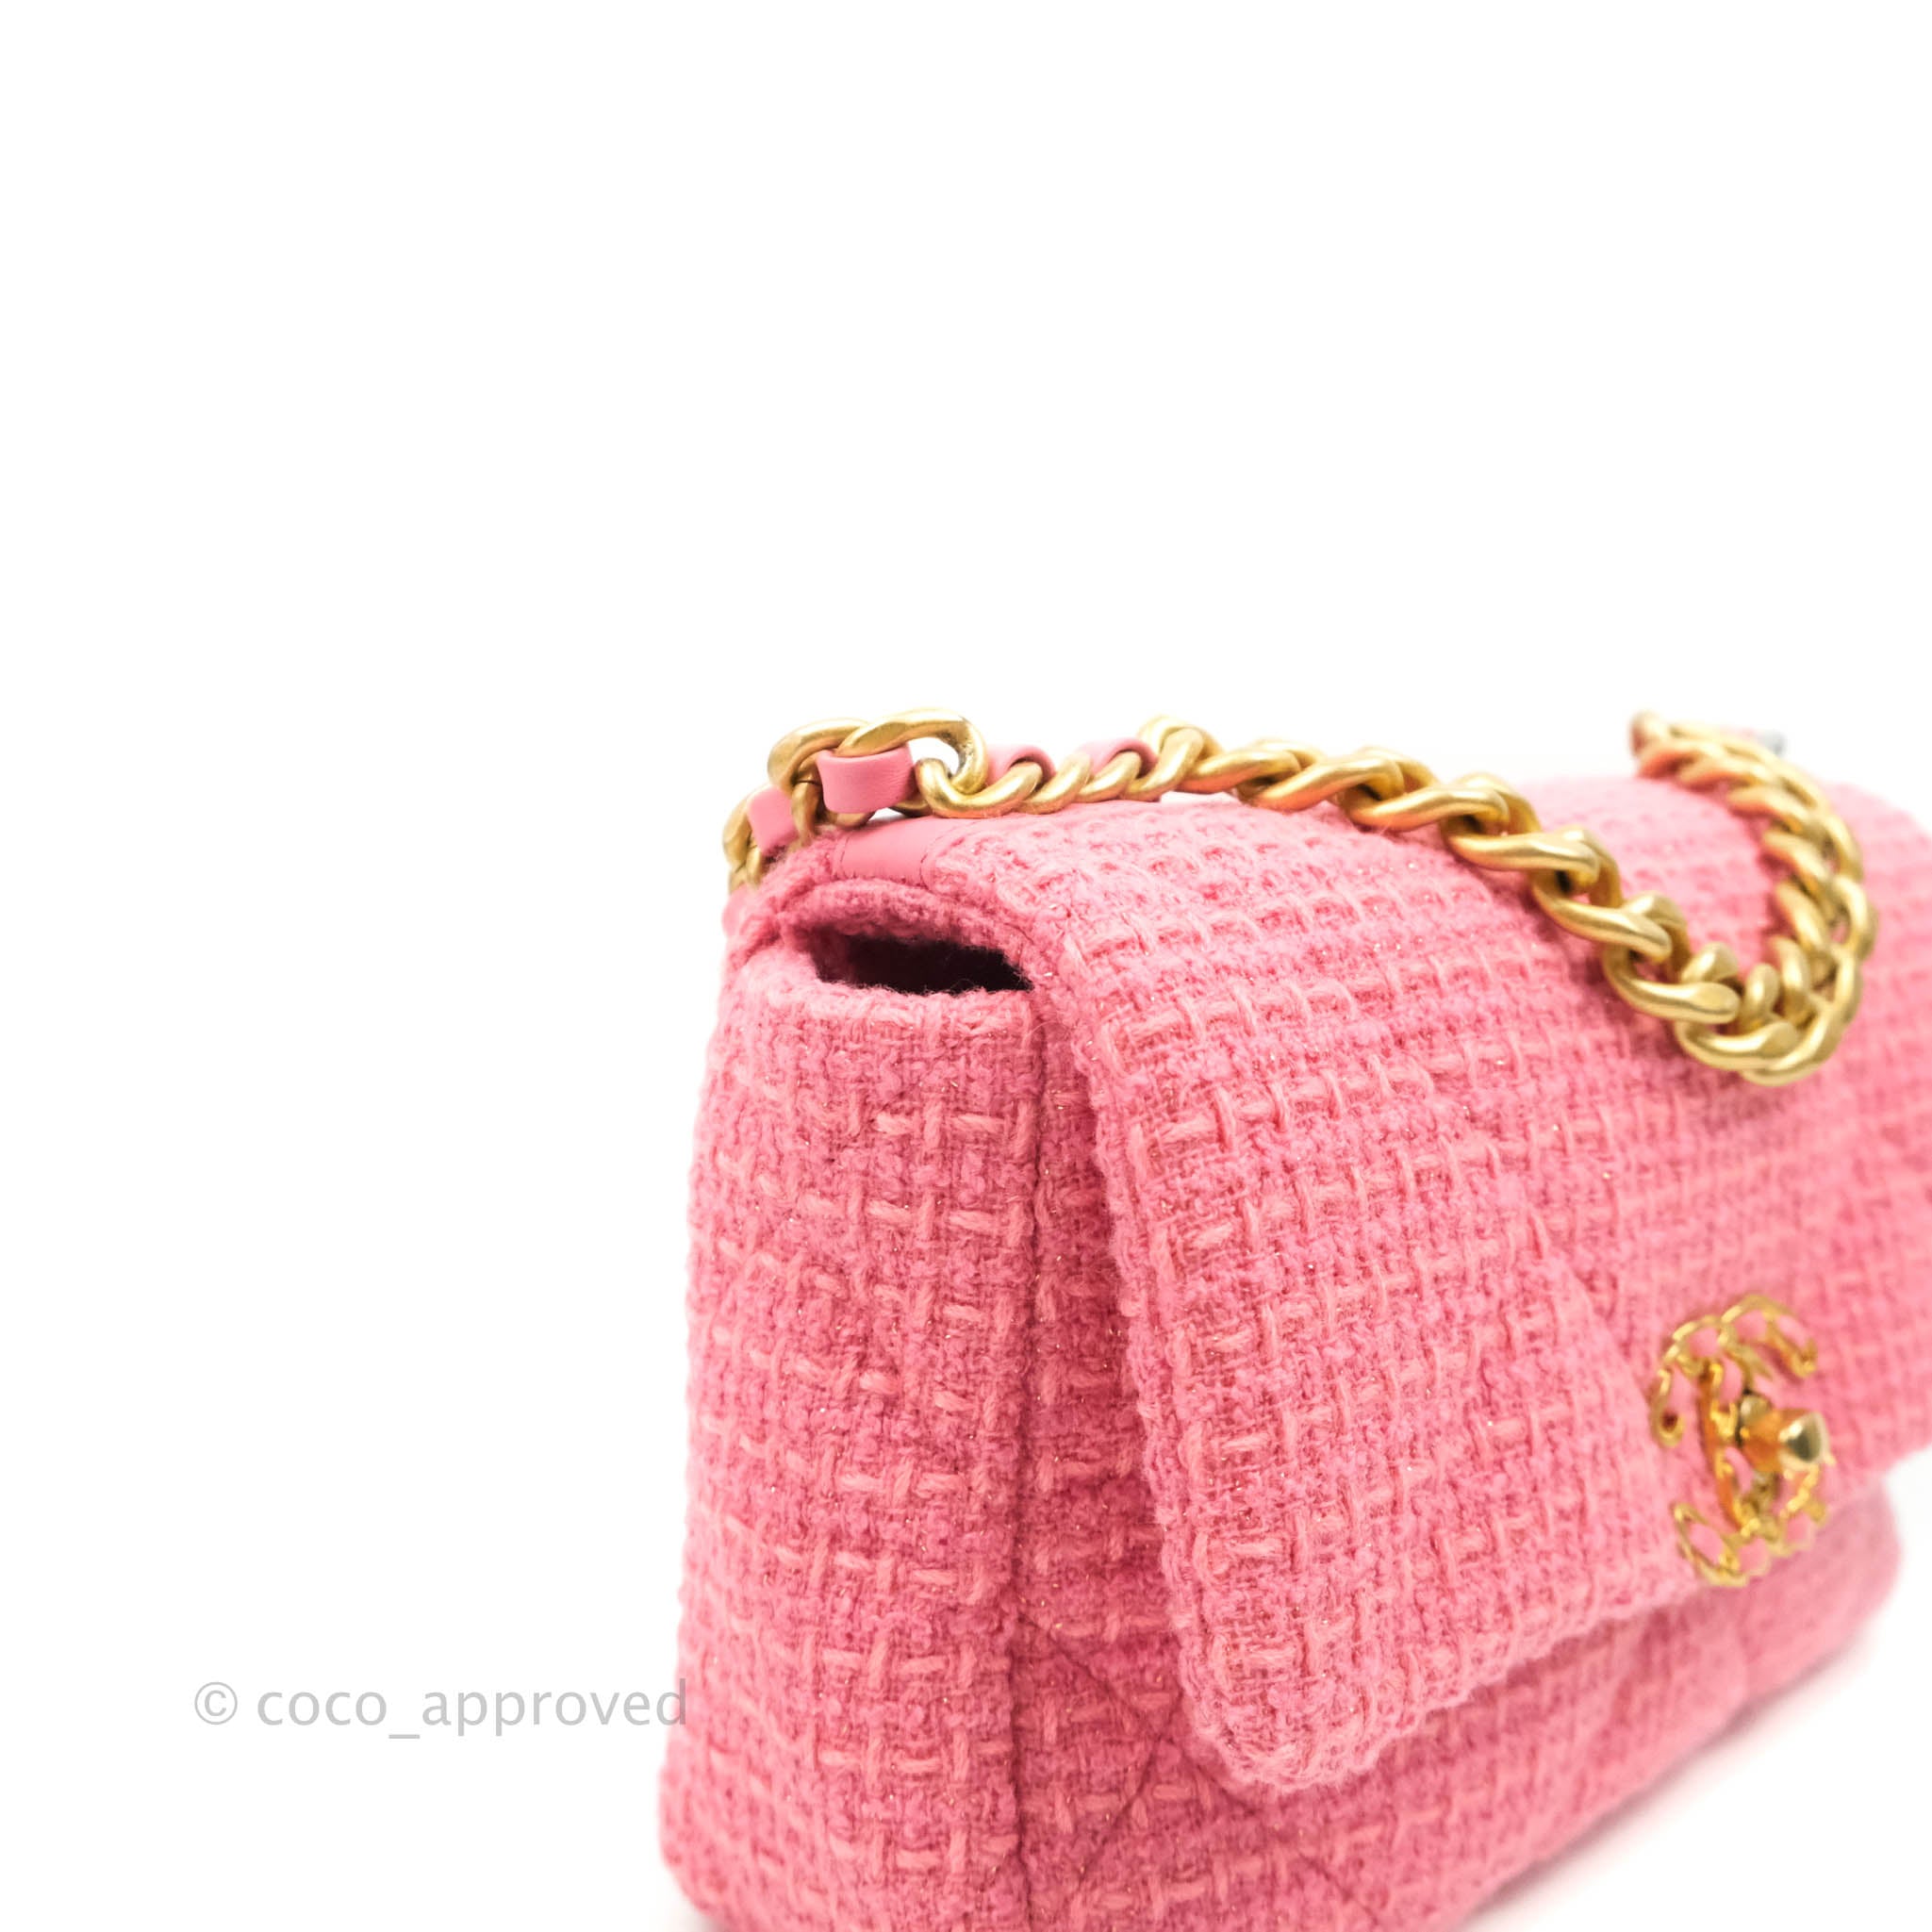 Chanel - Authenticated Chanel 19 Handbag - Tweed Pink Plain for Women, Very Good Condition